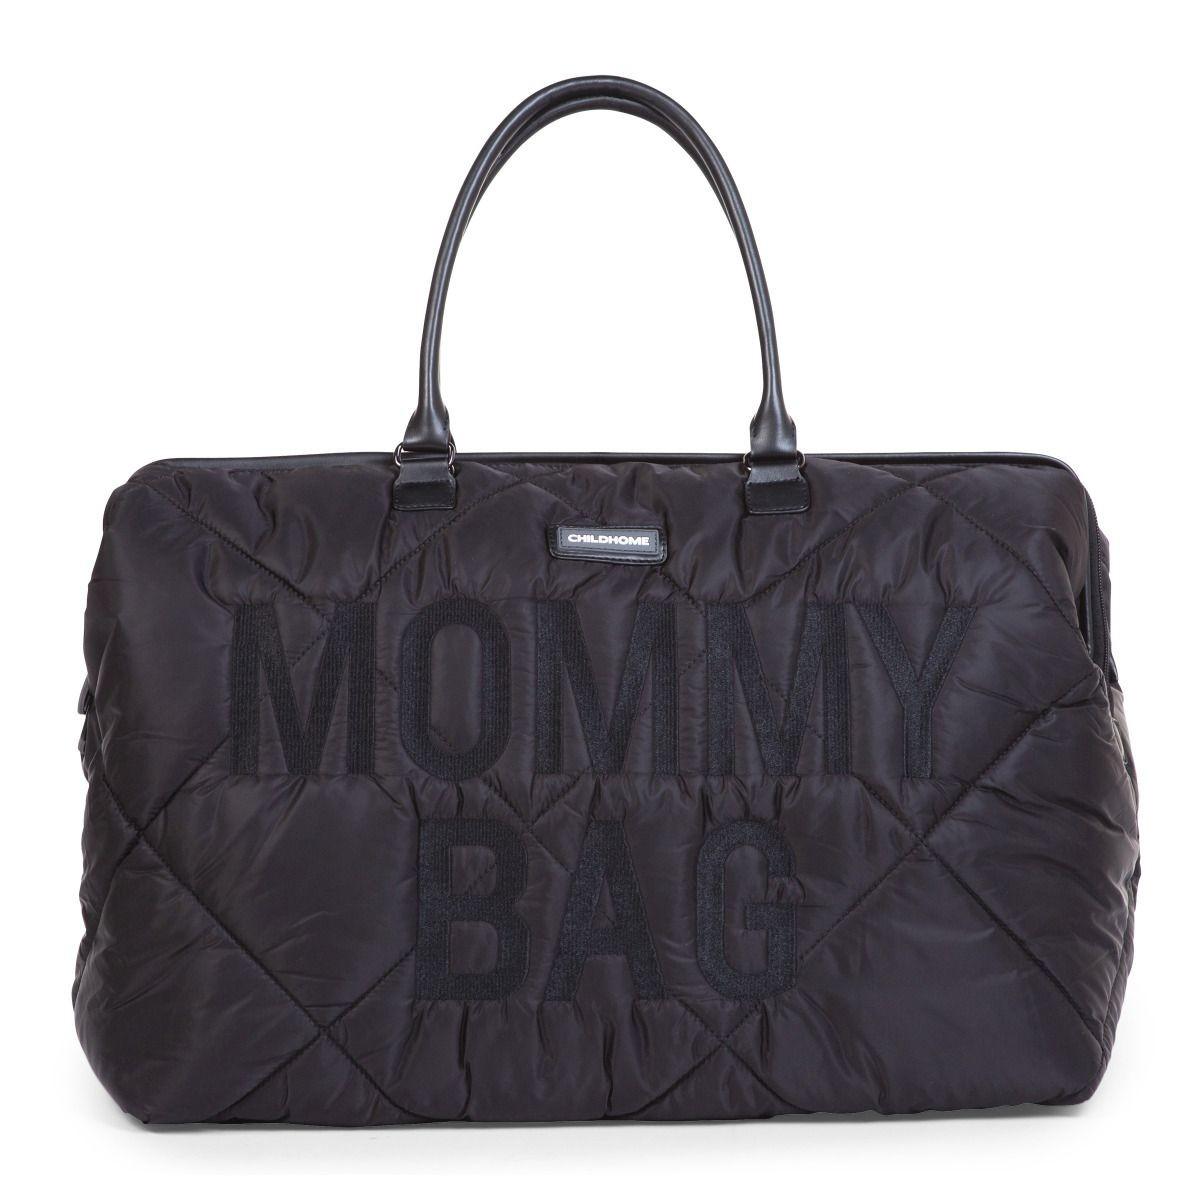 Childhome - Mommy bag puffered black